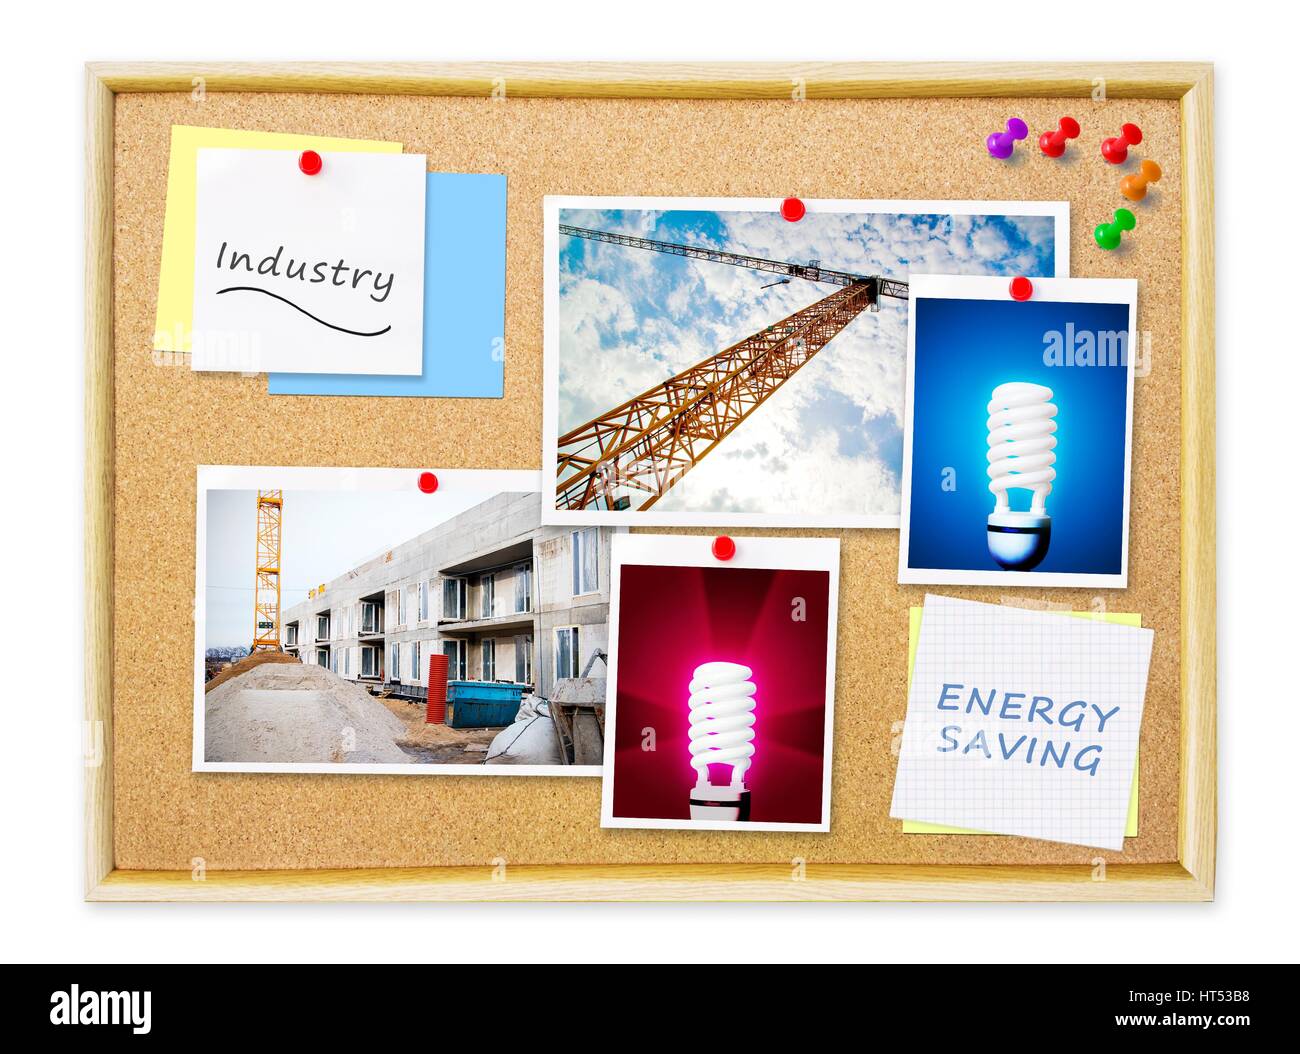 Industry and energy saving on memo cork pin board Stock Photo